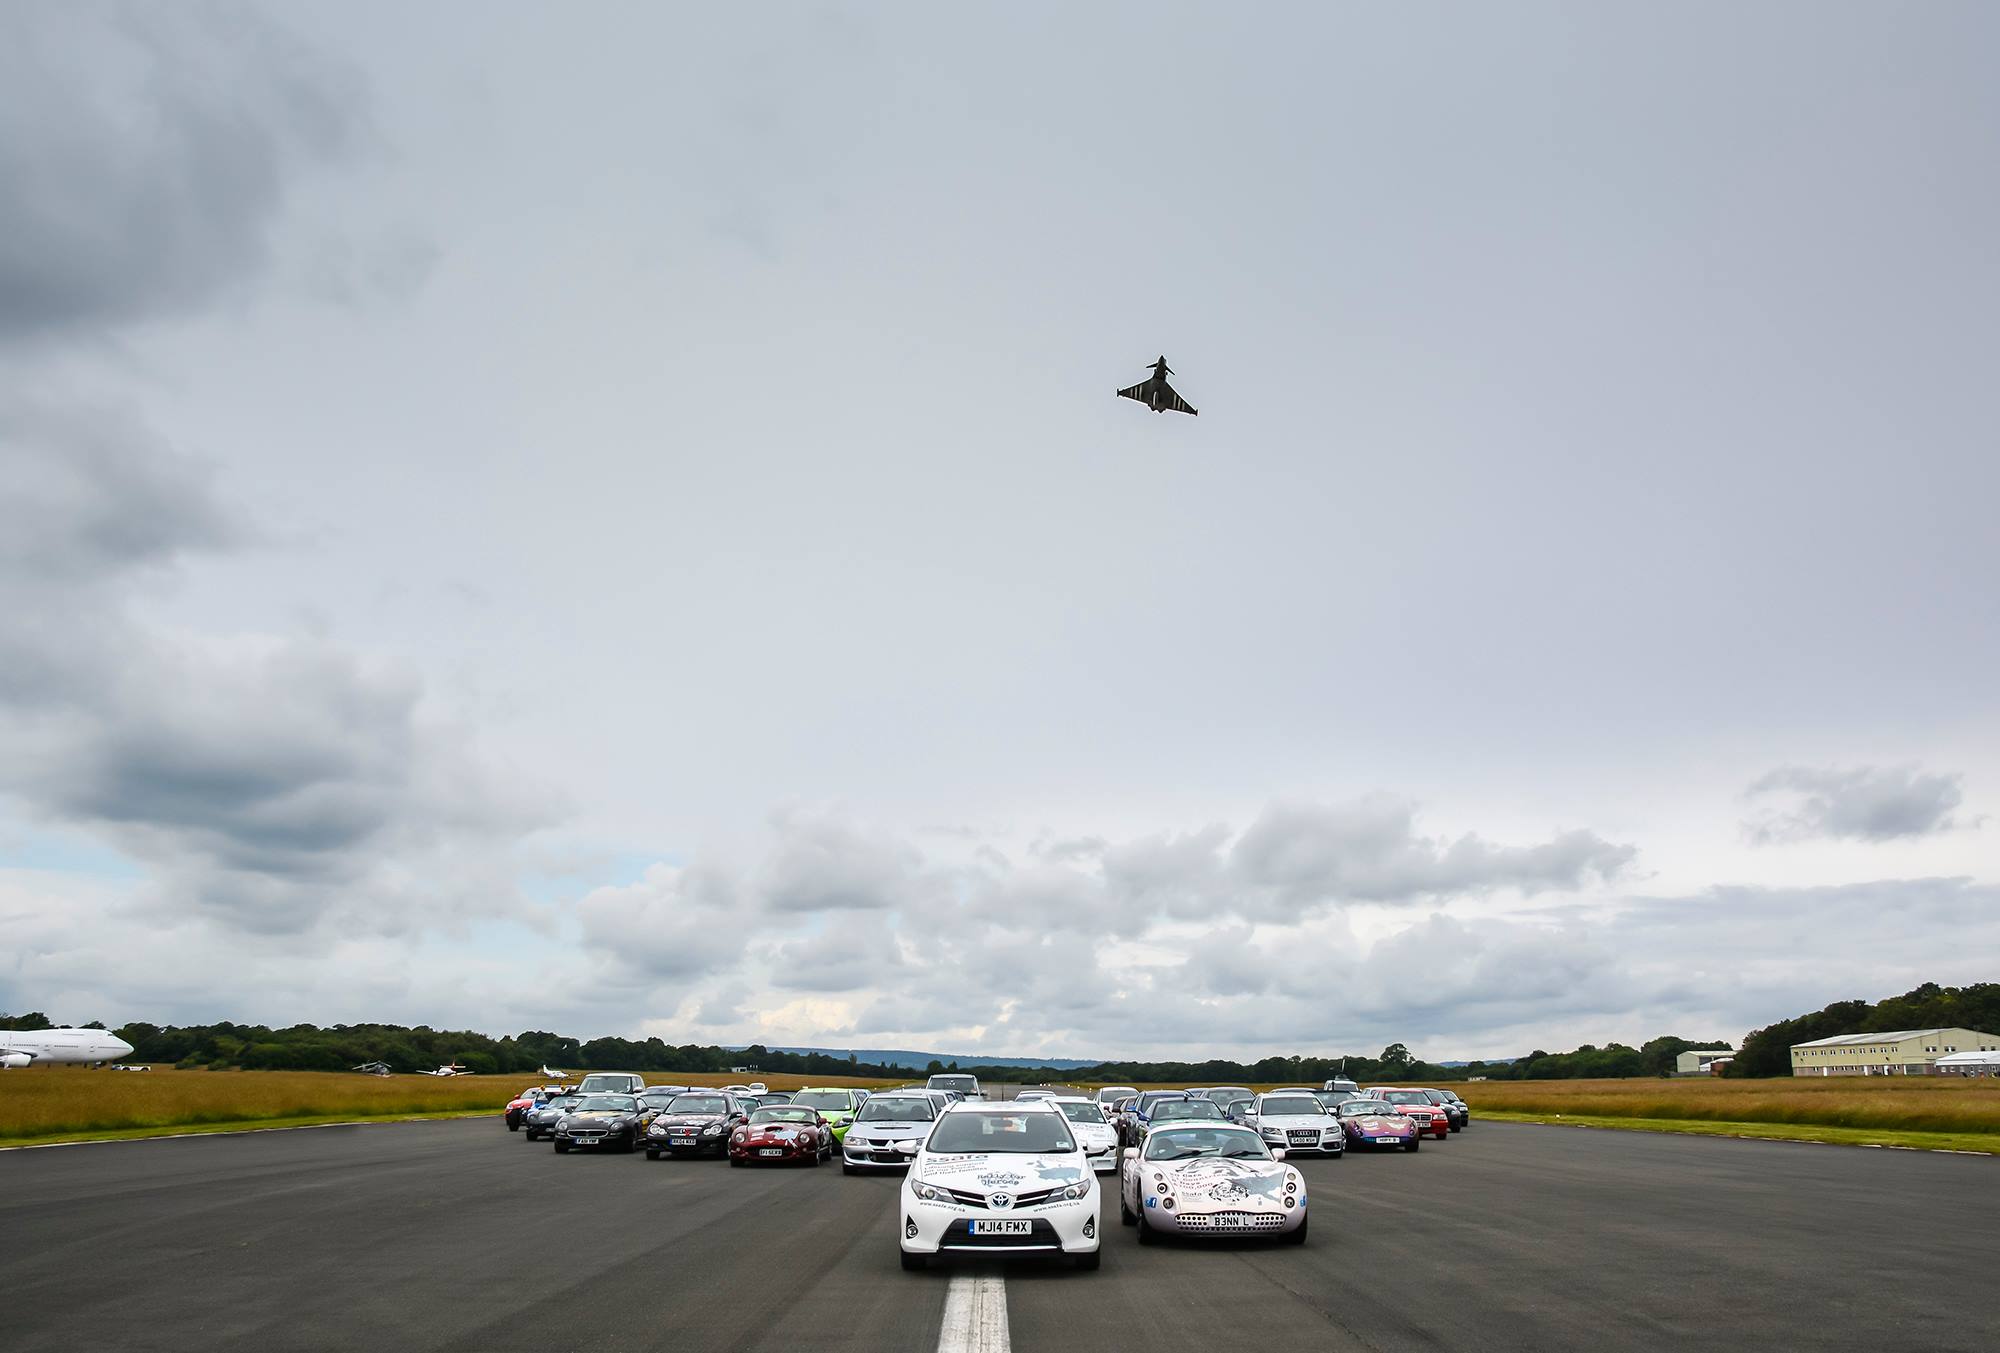 An airplane is flying over a parking lot - Pistonheads